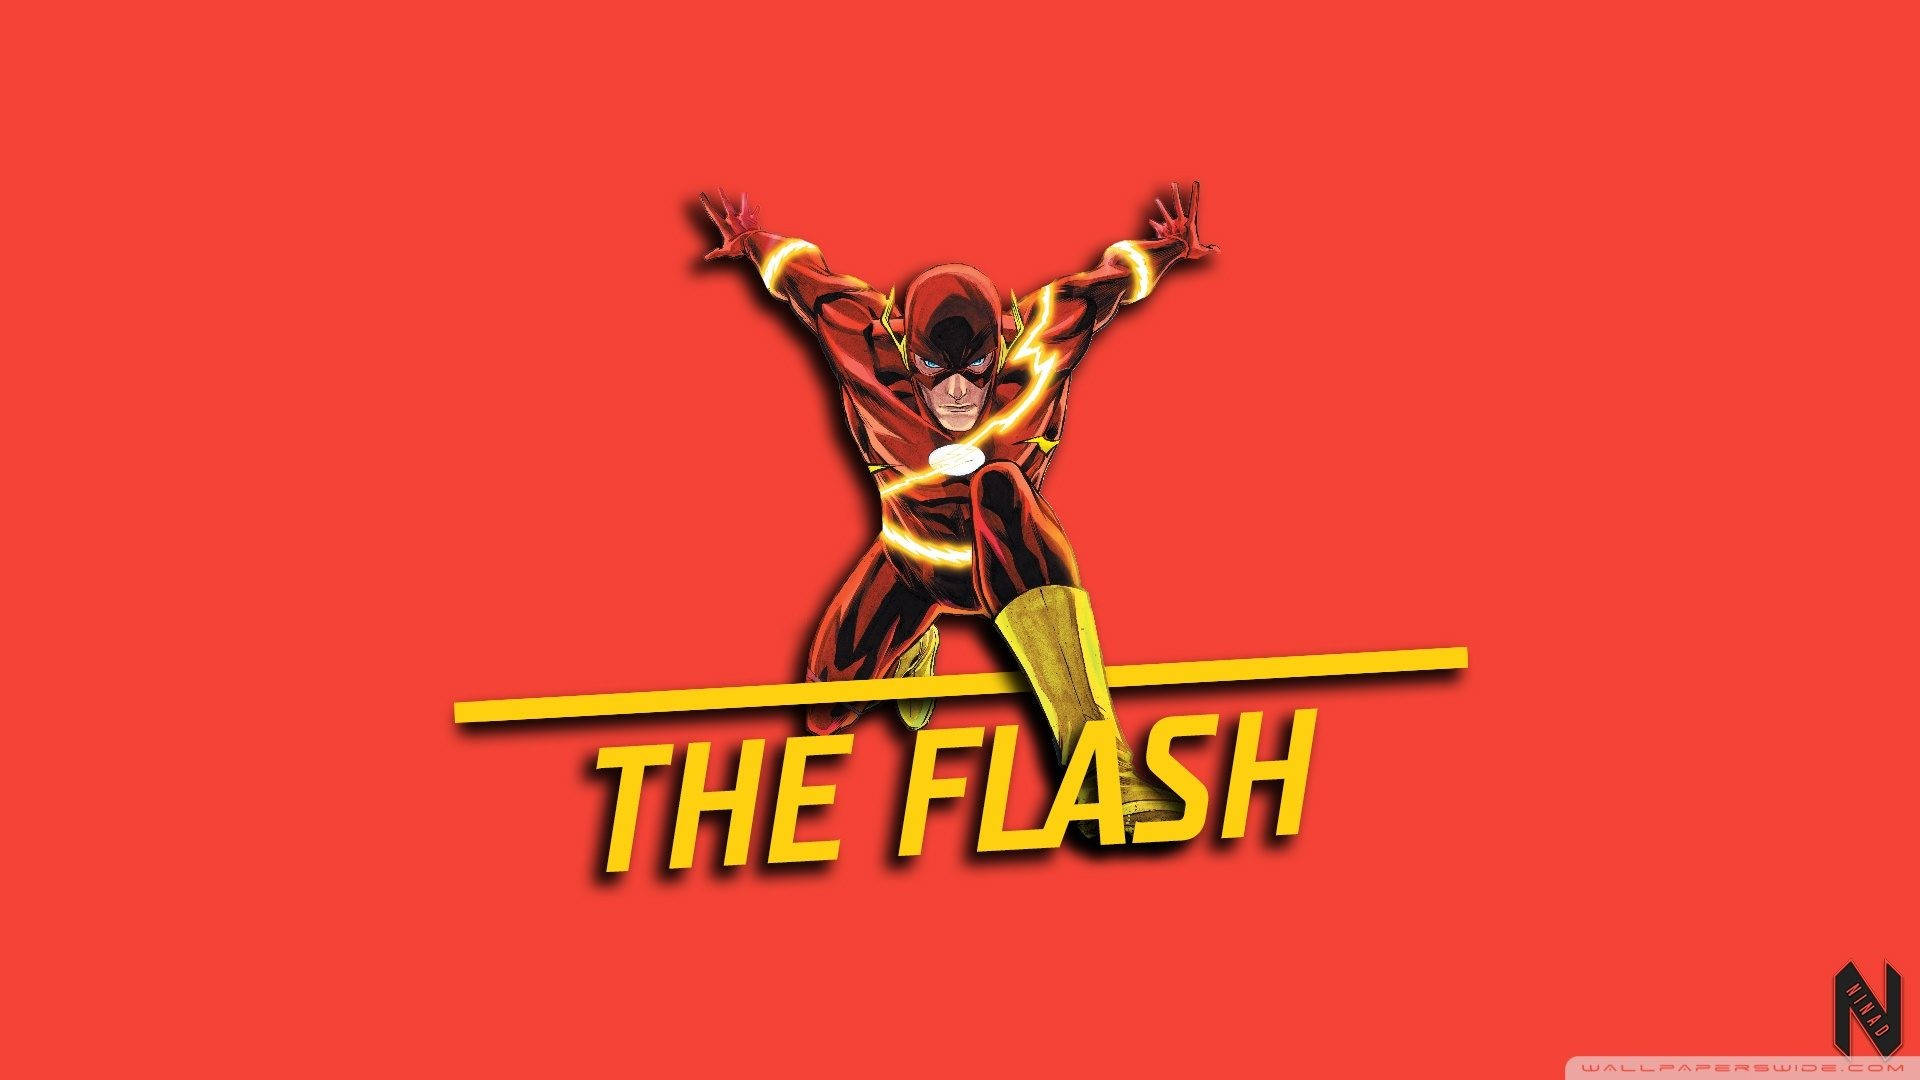 The Flash 4k Pose With Text Background